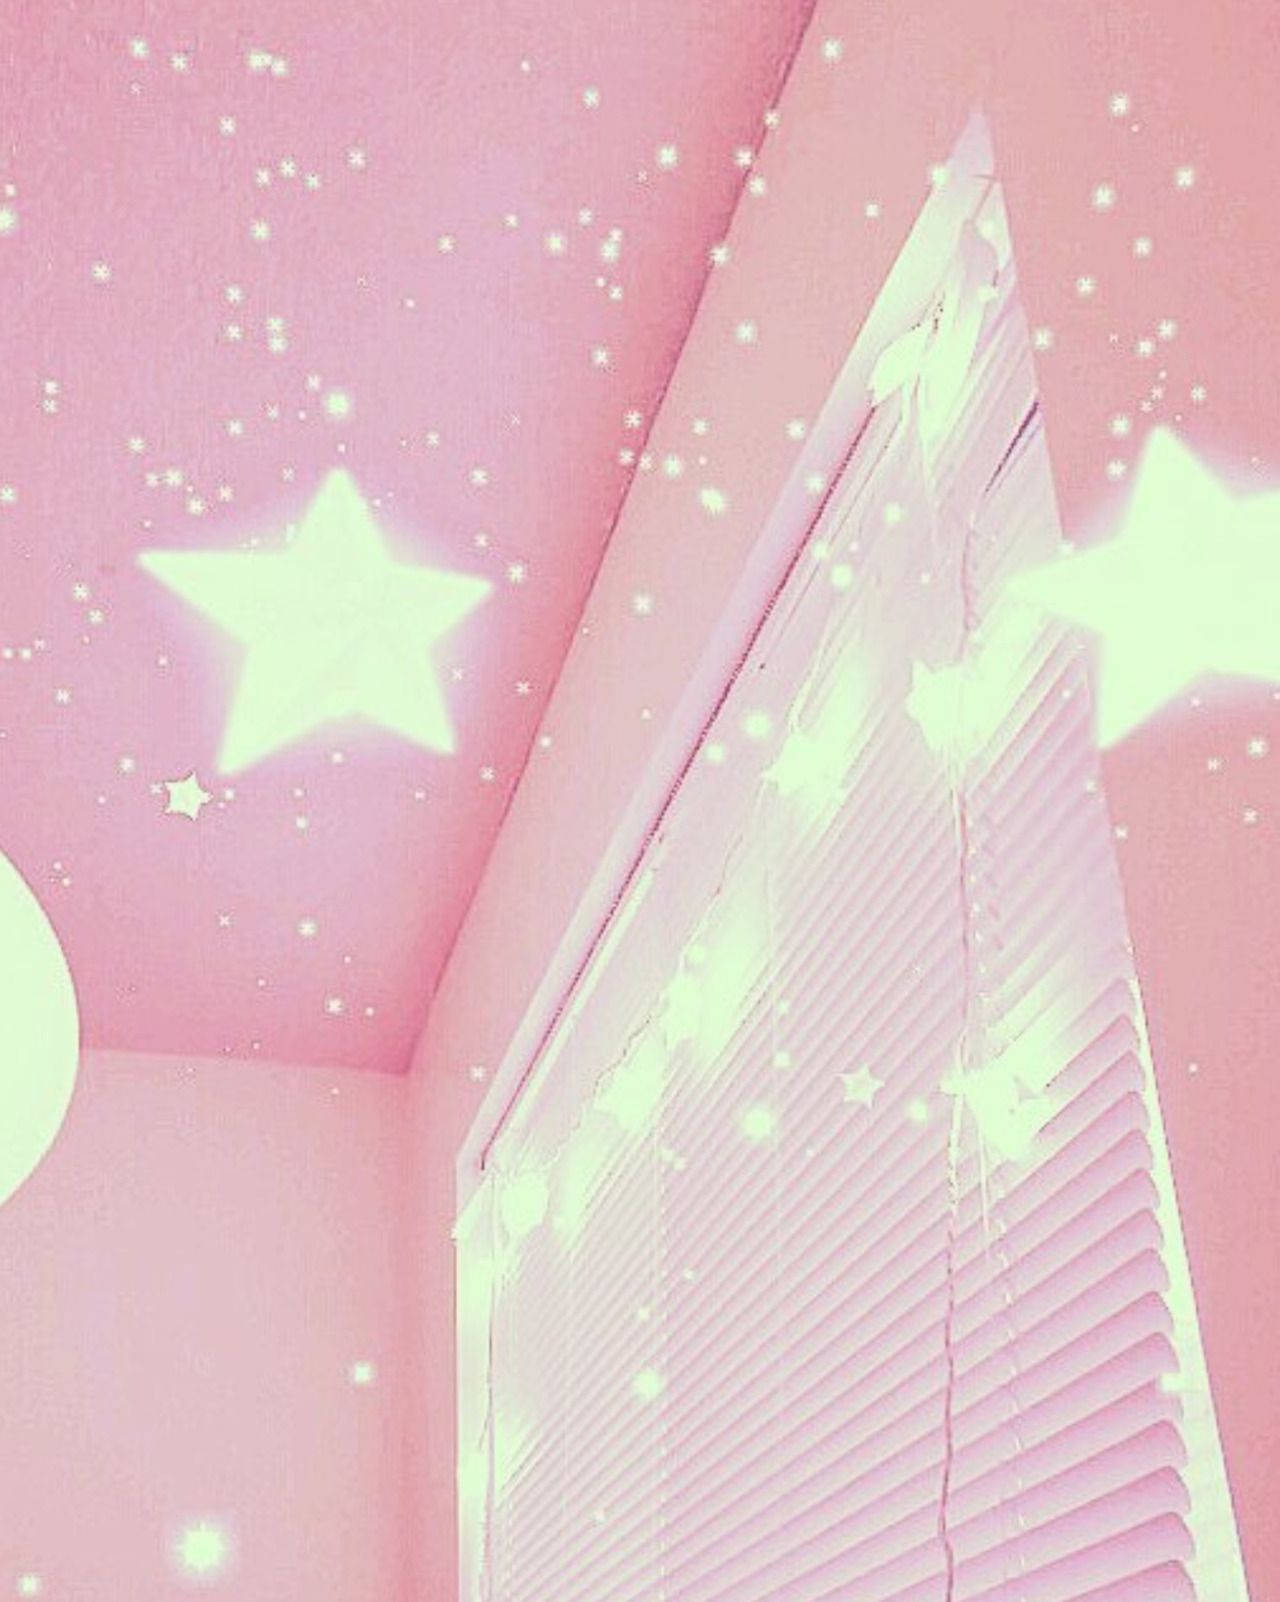 Aesthetic Pink Room With Glowing Stars Wallpaper